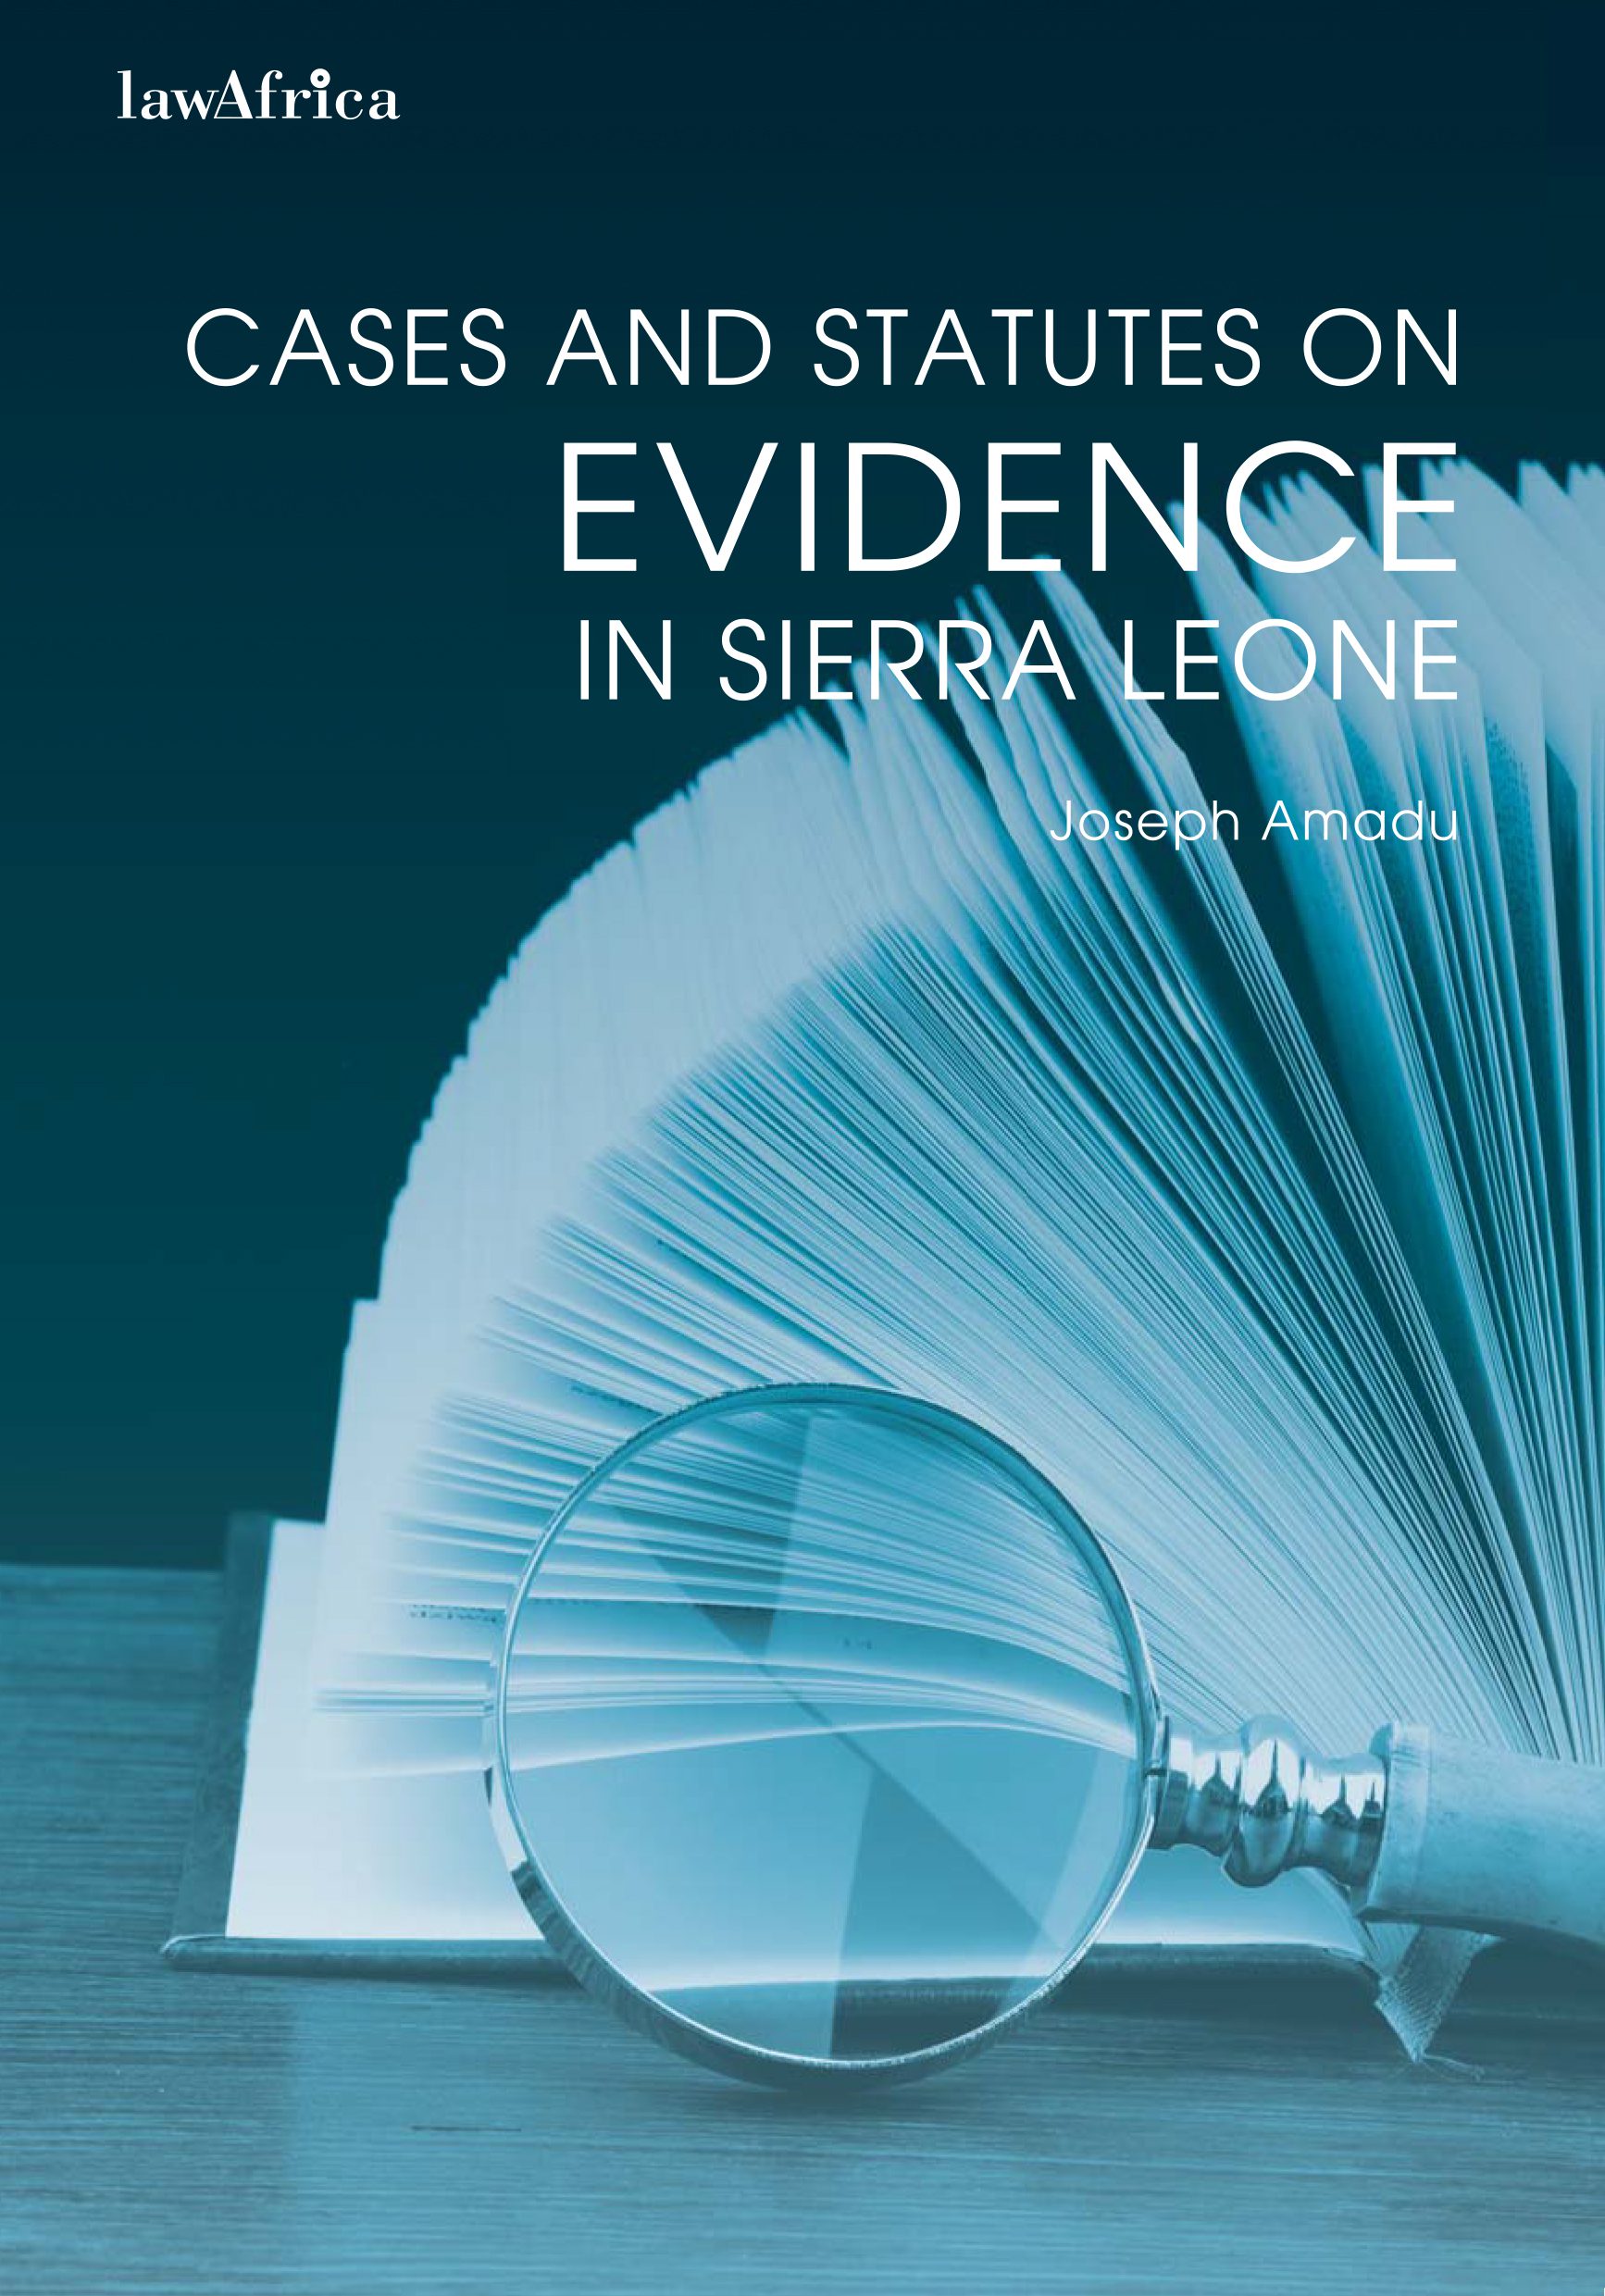 Cases and Statutes on Evidence in Sierra Leone - Cover.ai